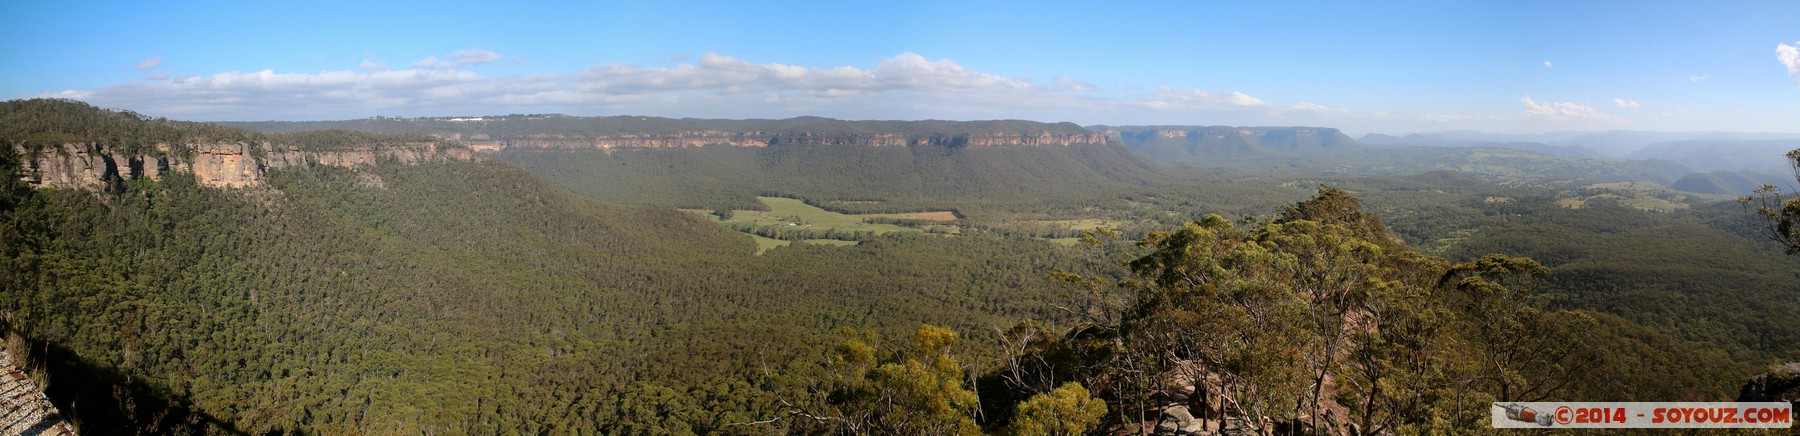 Blue Mountains - Megalong Valley - Hargraves Lookout - Panorama
Stitched Panorama
Mots-clés: AUS Australie geo:lat=-33.67695478 geo:lon=150.24280865 geotagged Medlow Bath Megalong Valley New South Wales Blue Mountains patrimoine unesco panorama Hargraves Lookout paysage